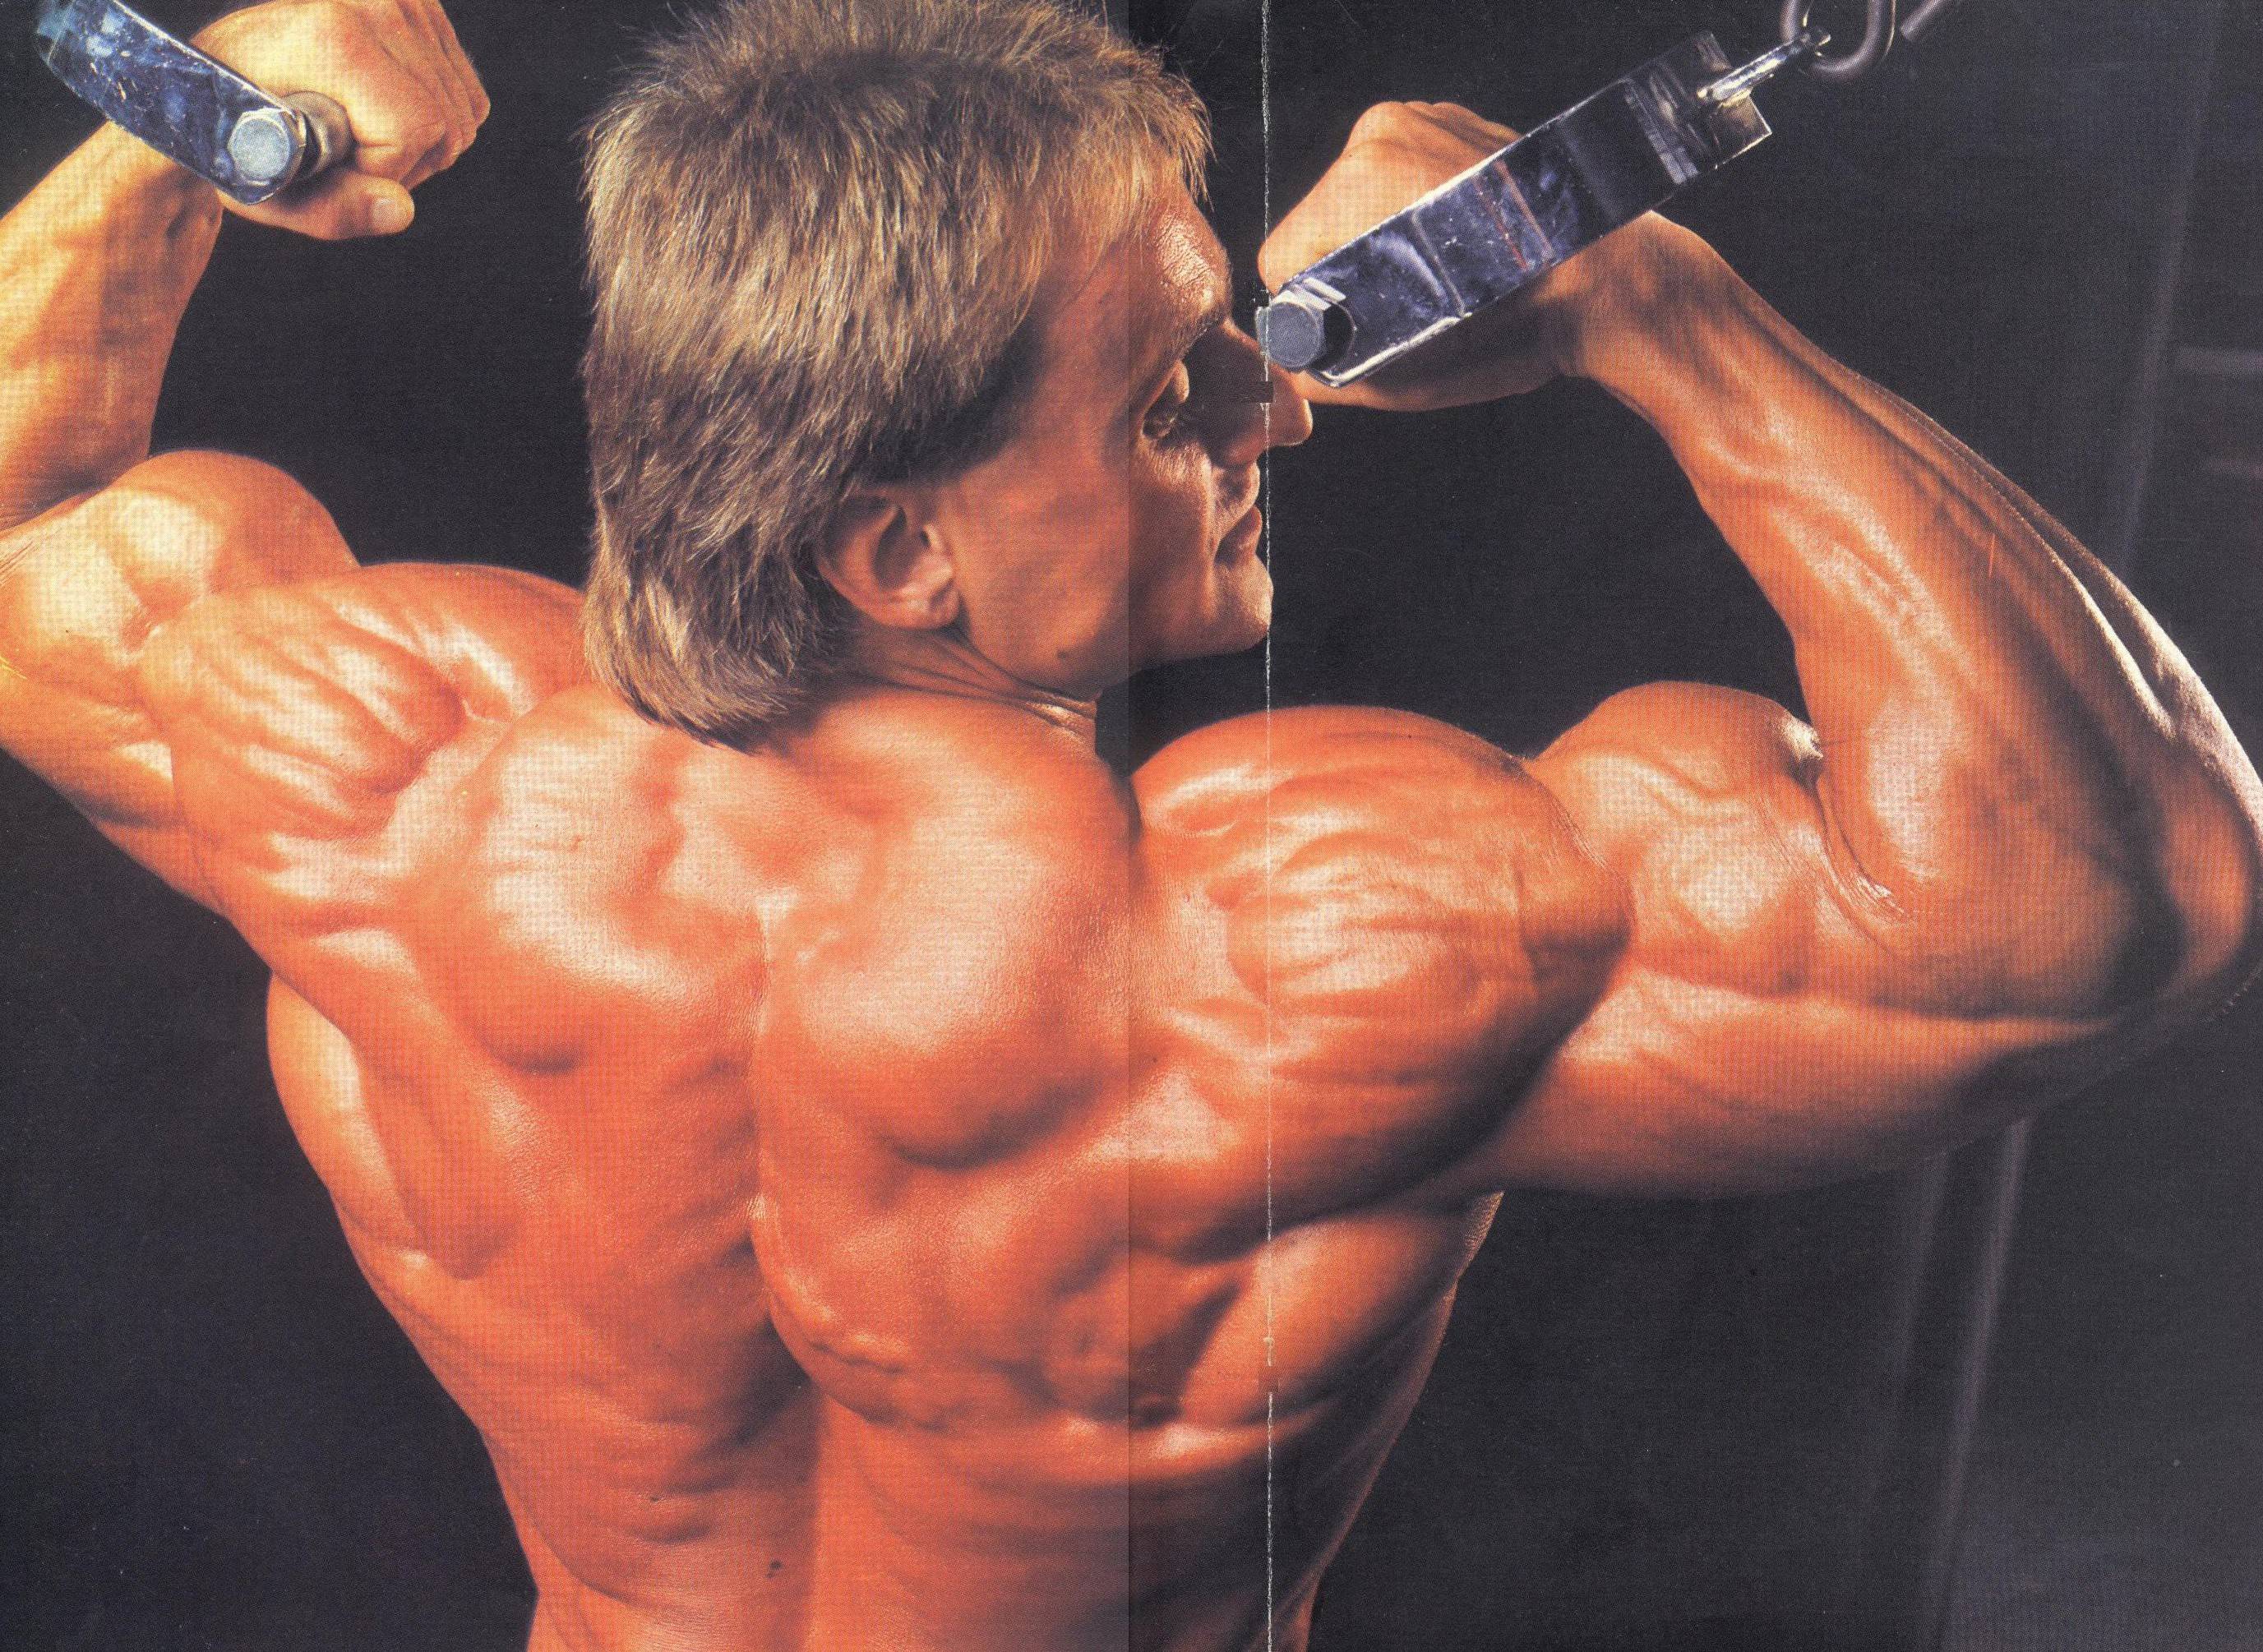 Andreas munzer - greatest physiques